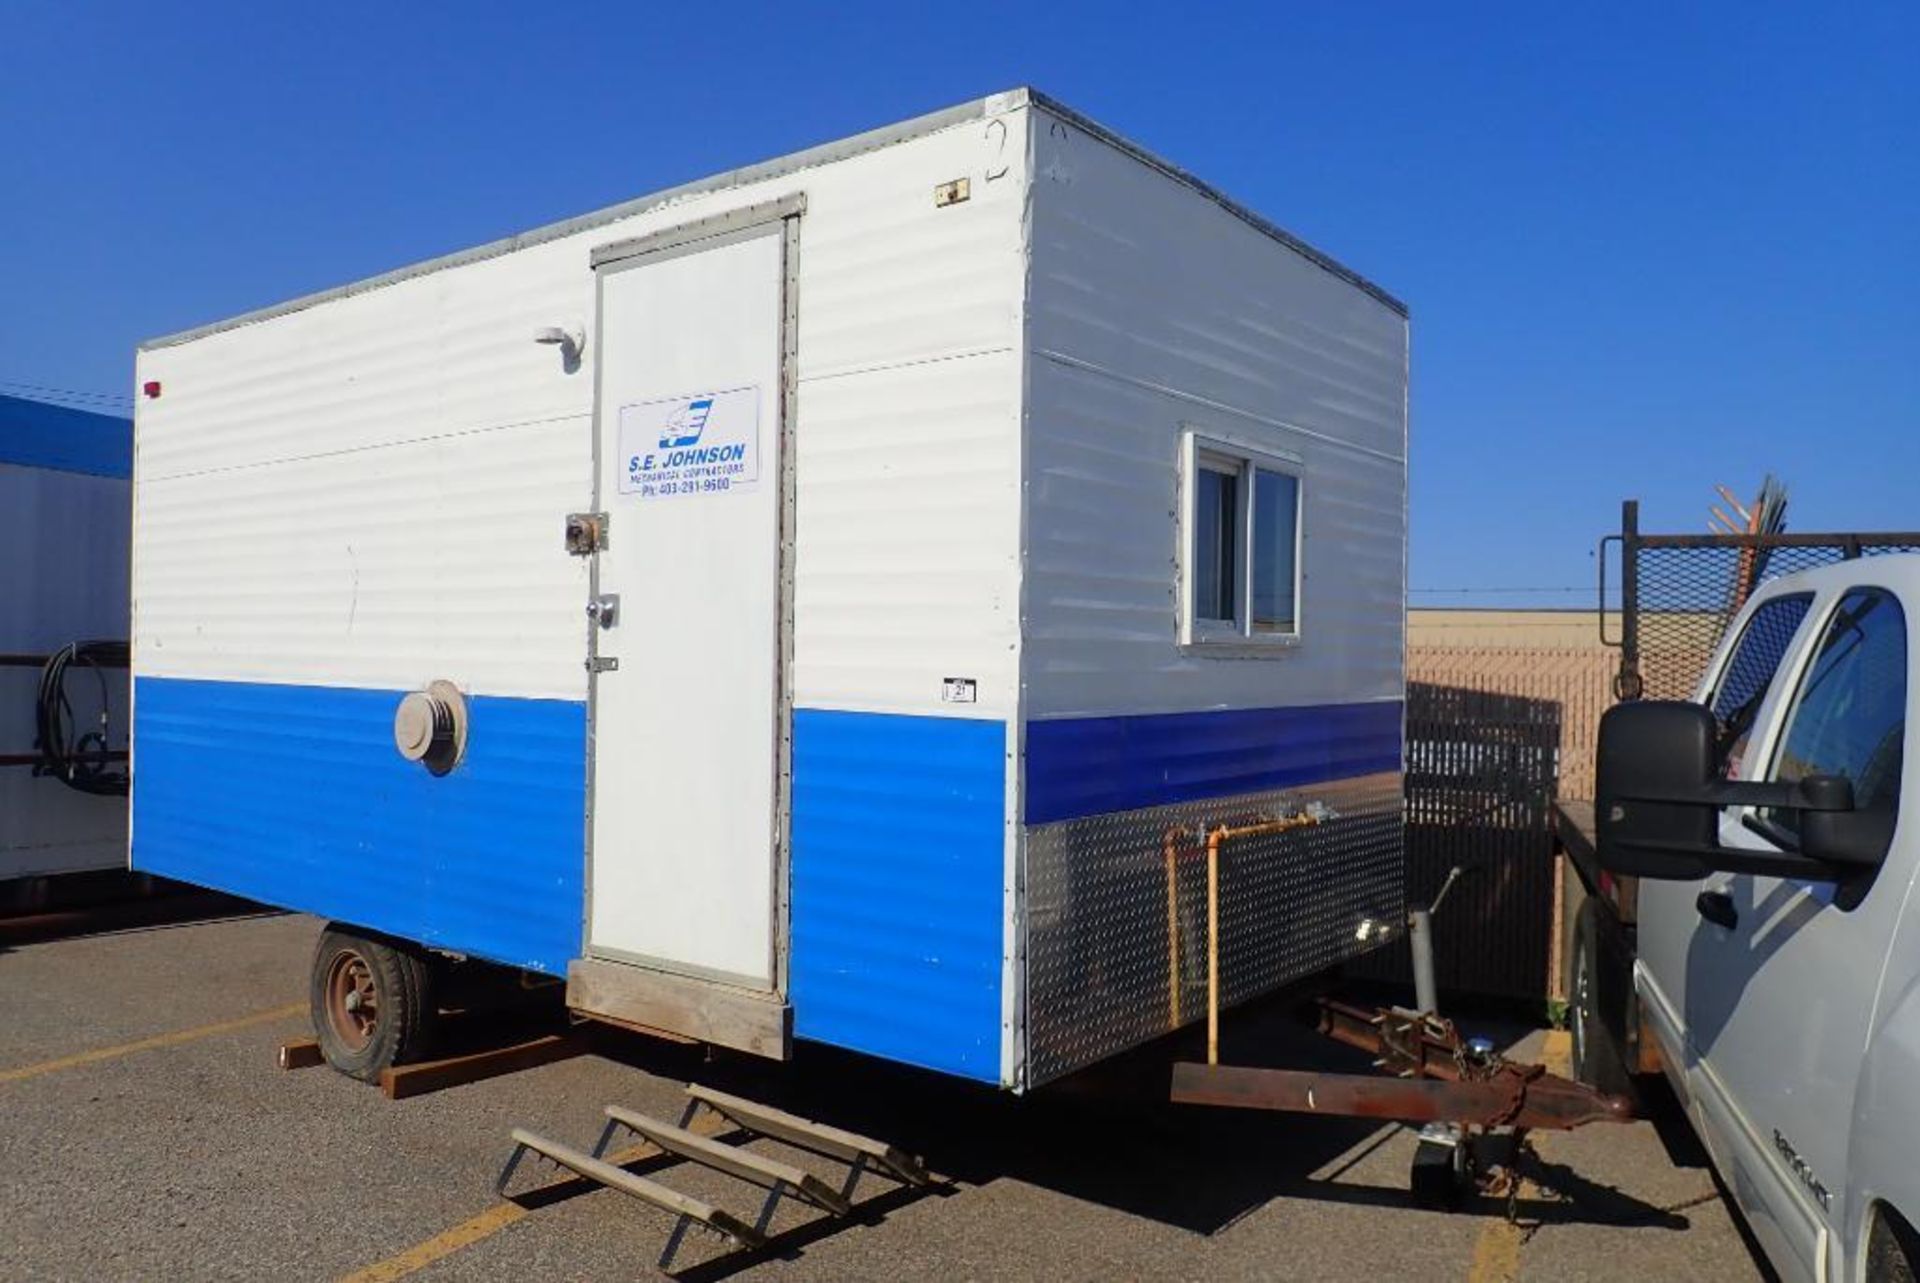 Single Axle 16'x8' Office Trailer w/Furnace and Contents, VIN- NVSN.